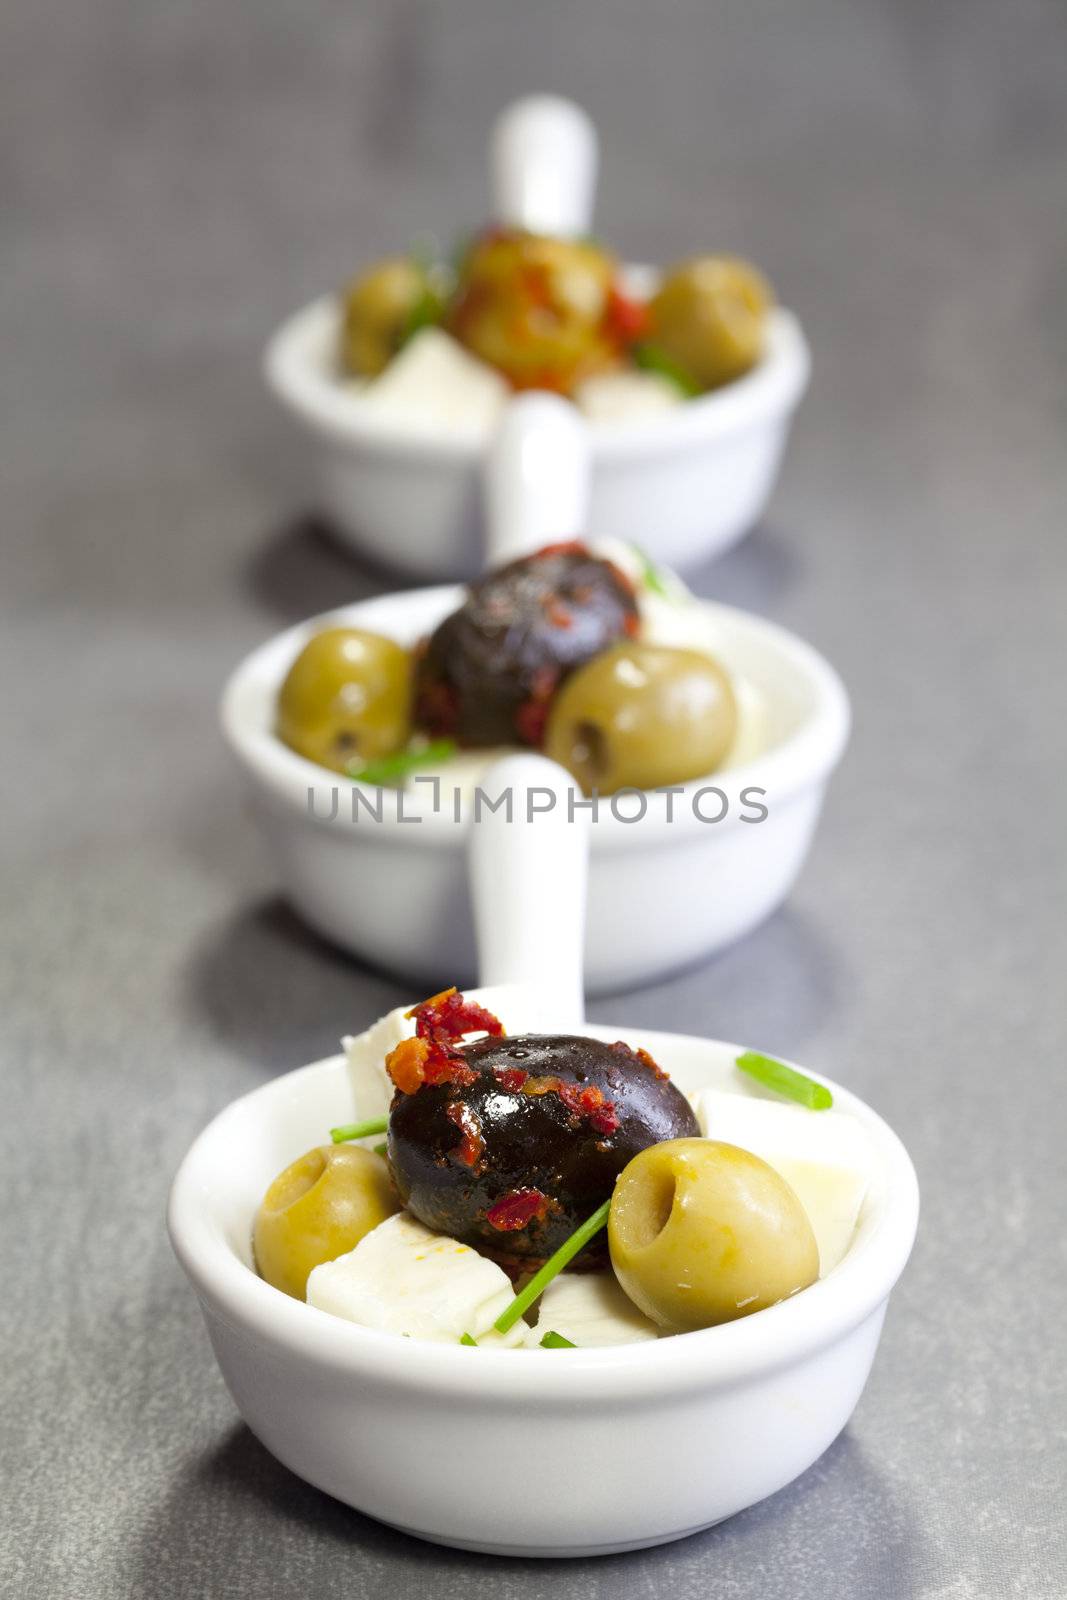 olives with feta cheese in a bowl by Bestpictures